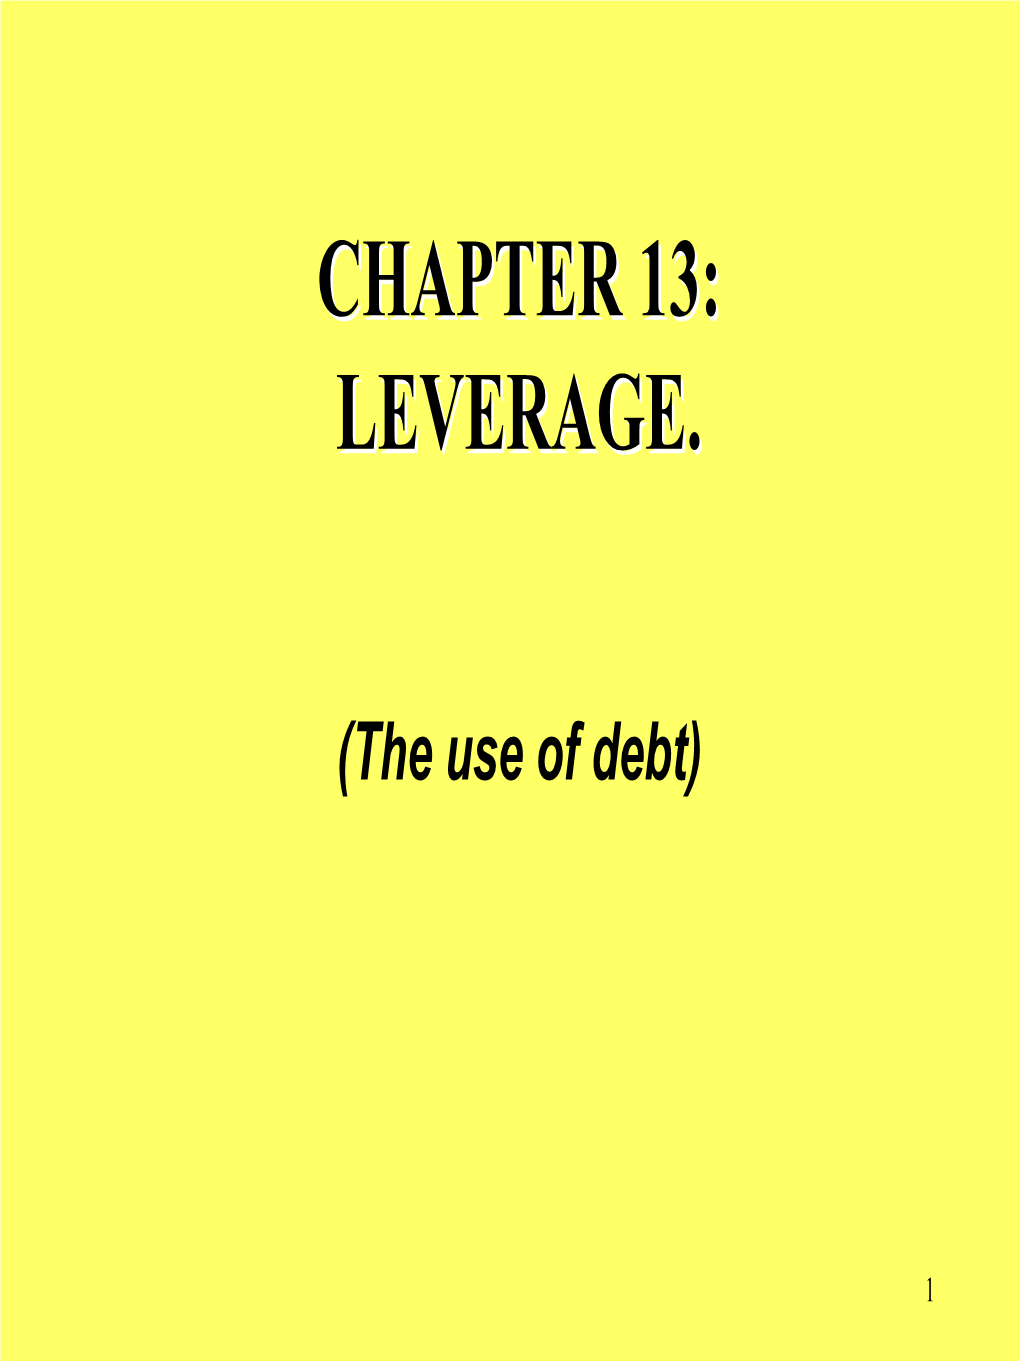 Chapter 13 Lecture: Leverage